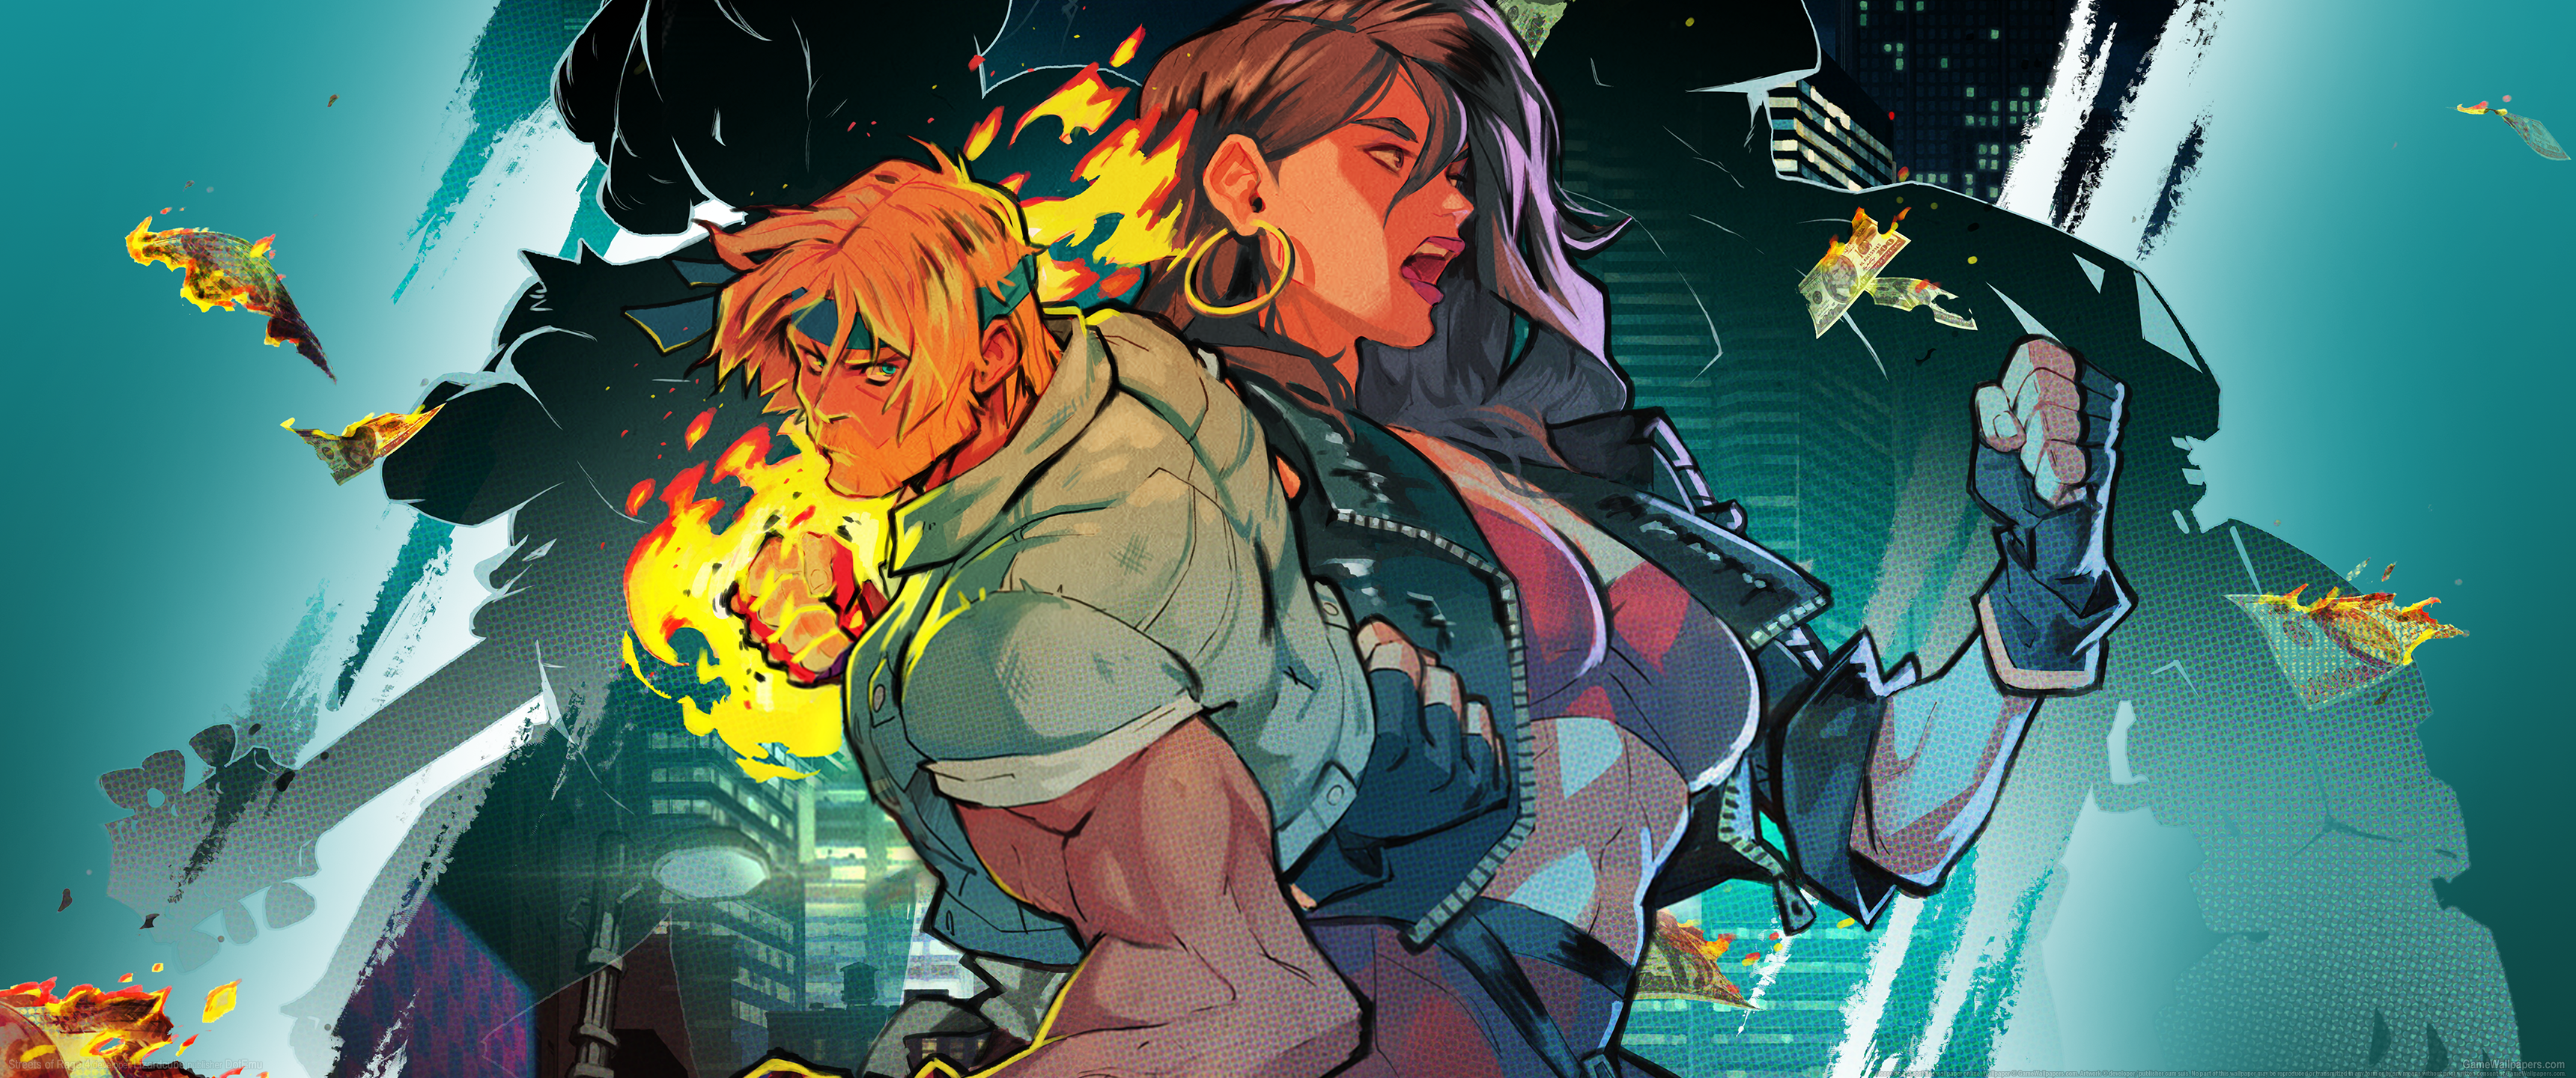 Streets of Rage 4 3440x1440 wallpaper or background 01